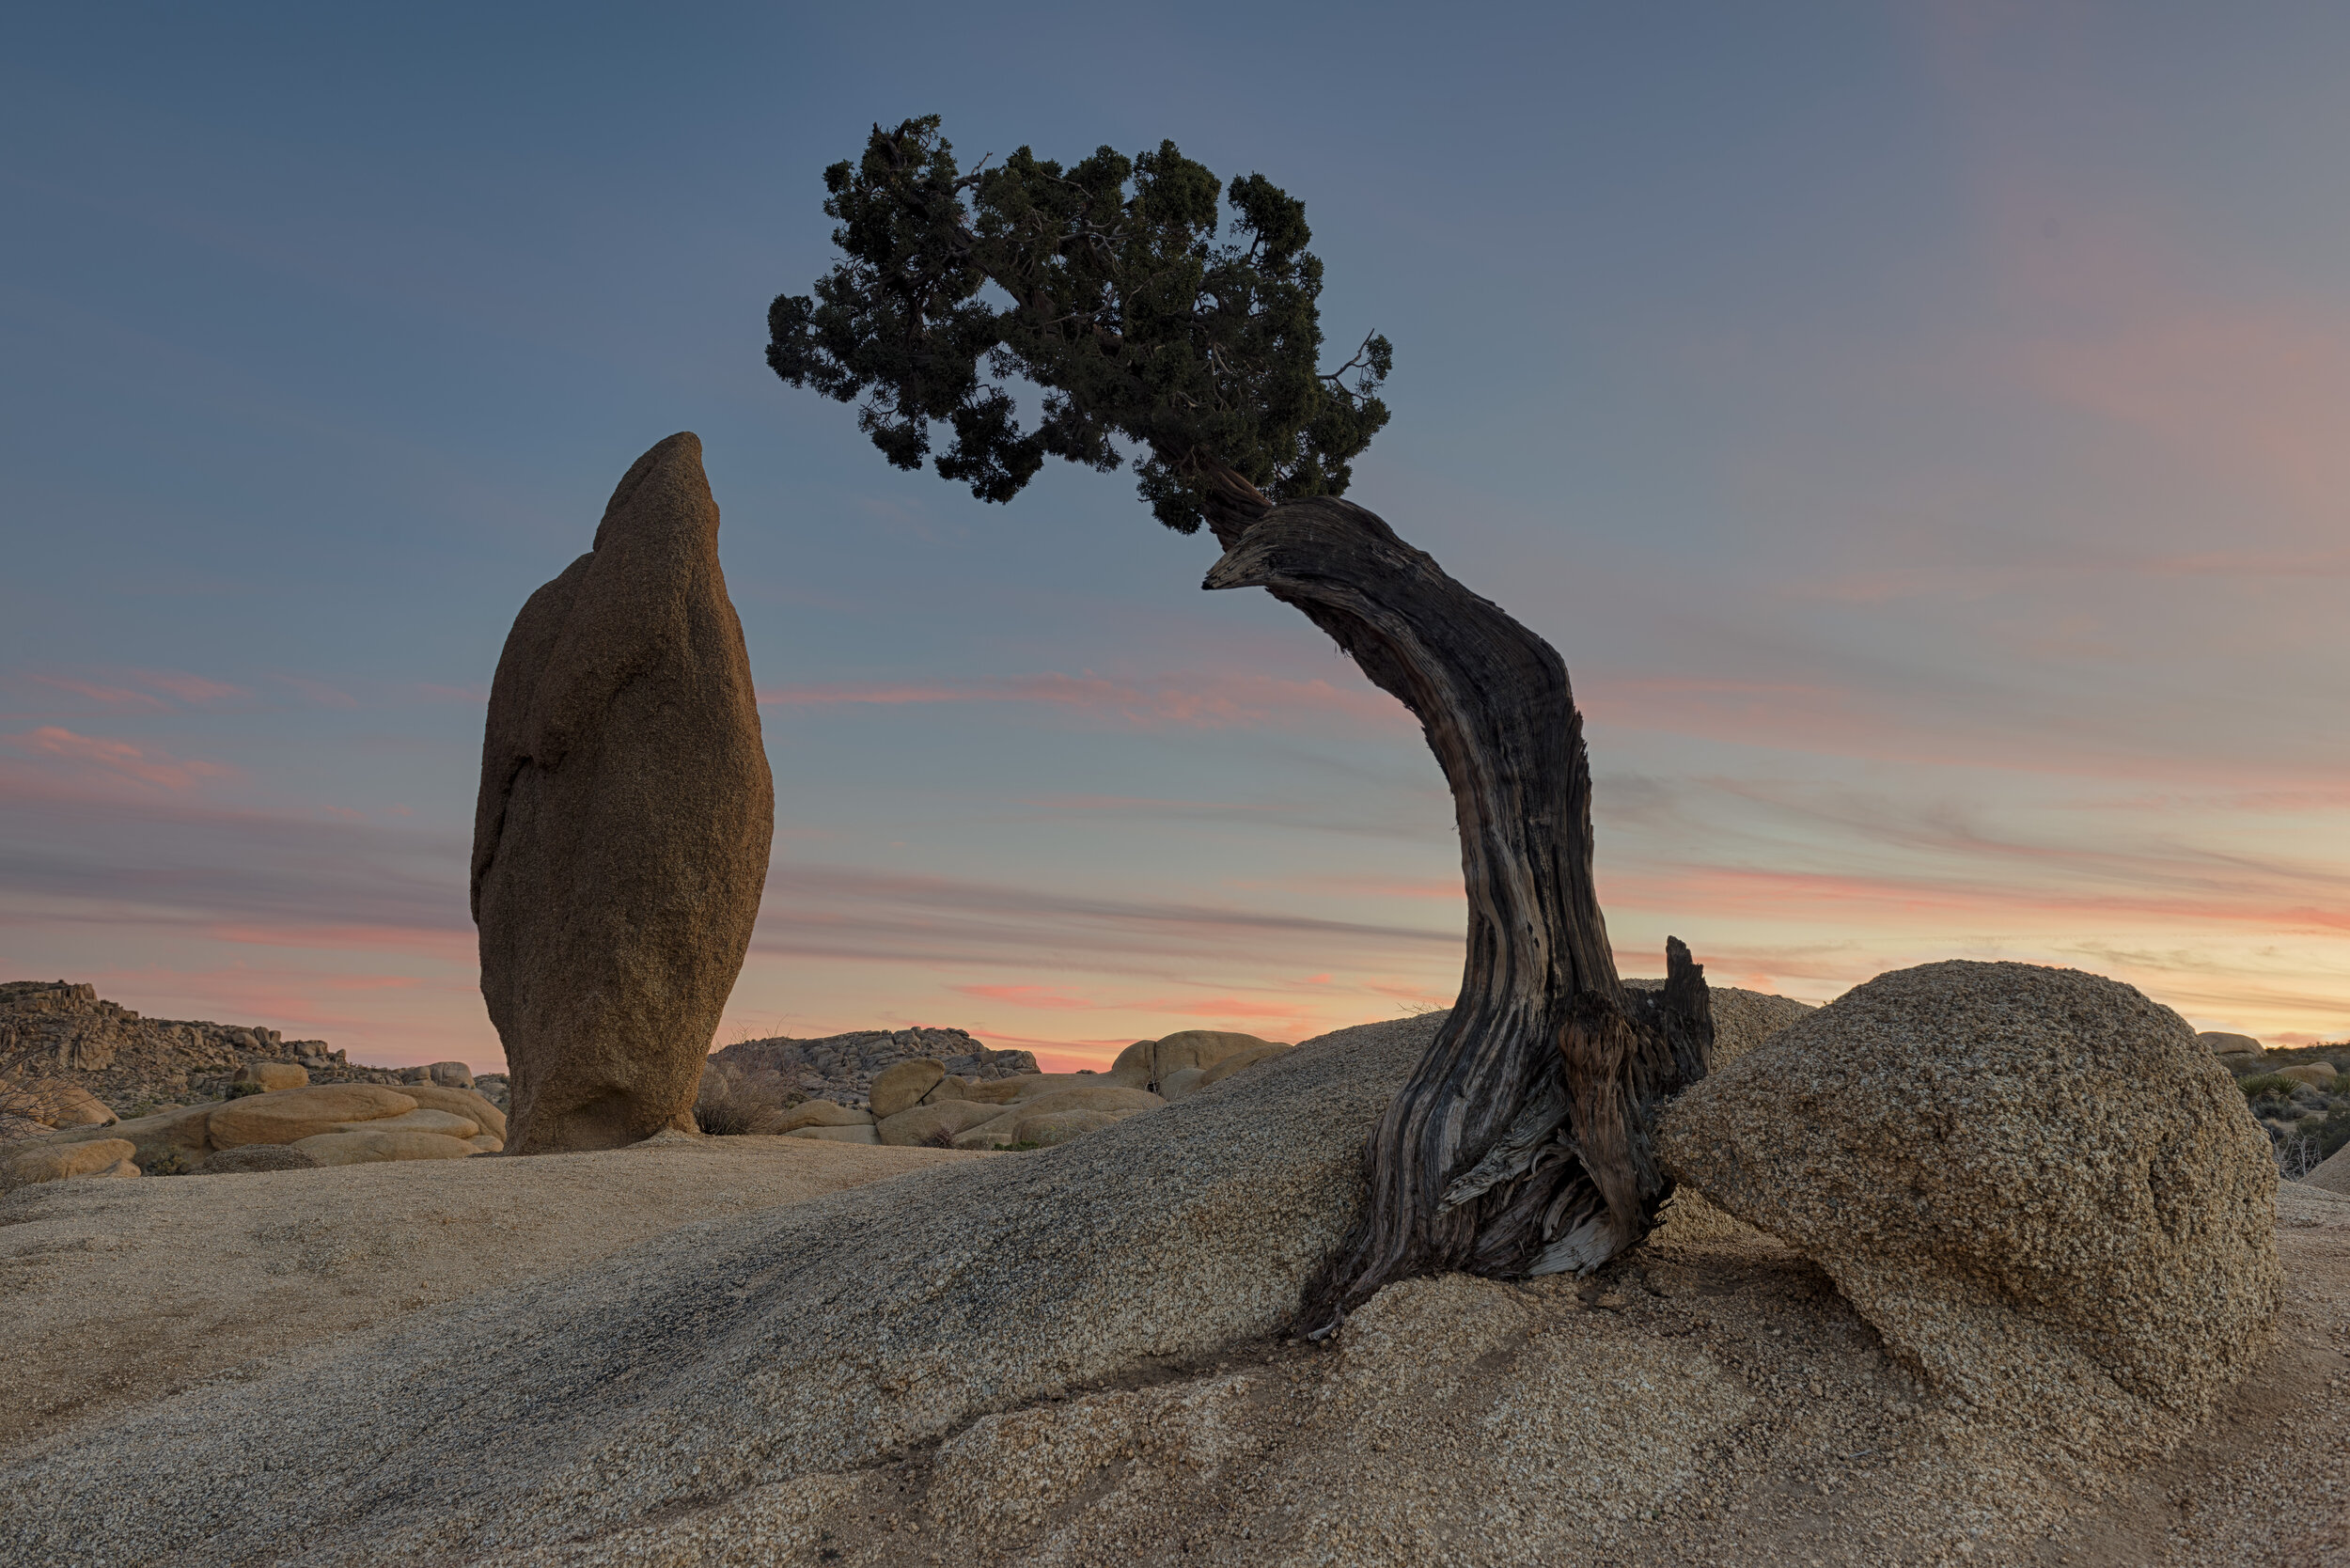 The Monolith and the Juniper of Joshua Tree NP